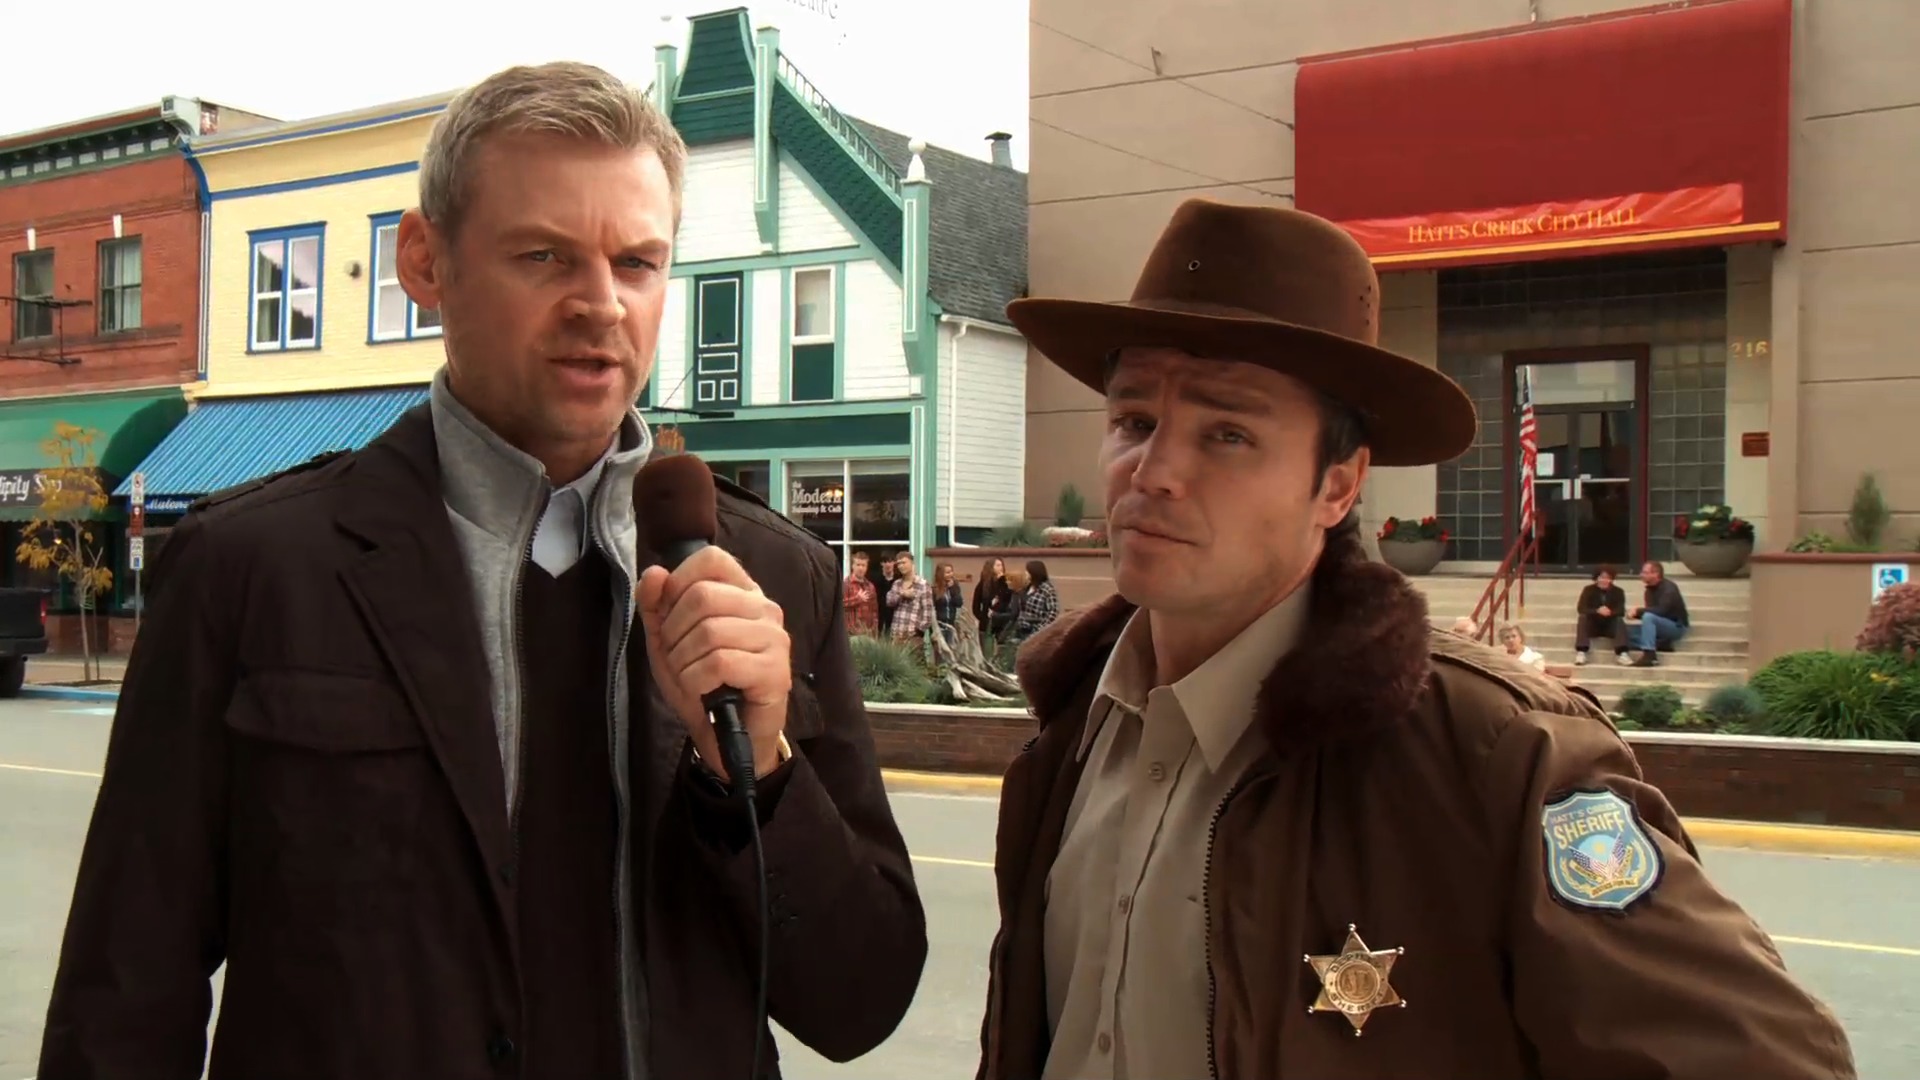 James Parnell interviews the sheriff in 'Embedded'